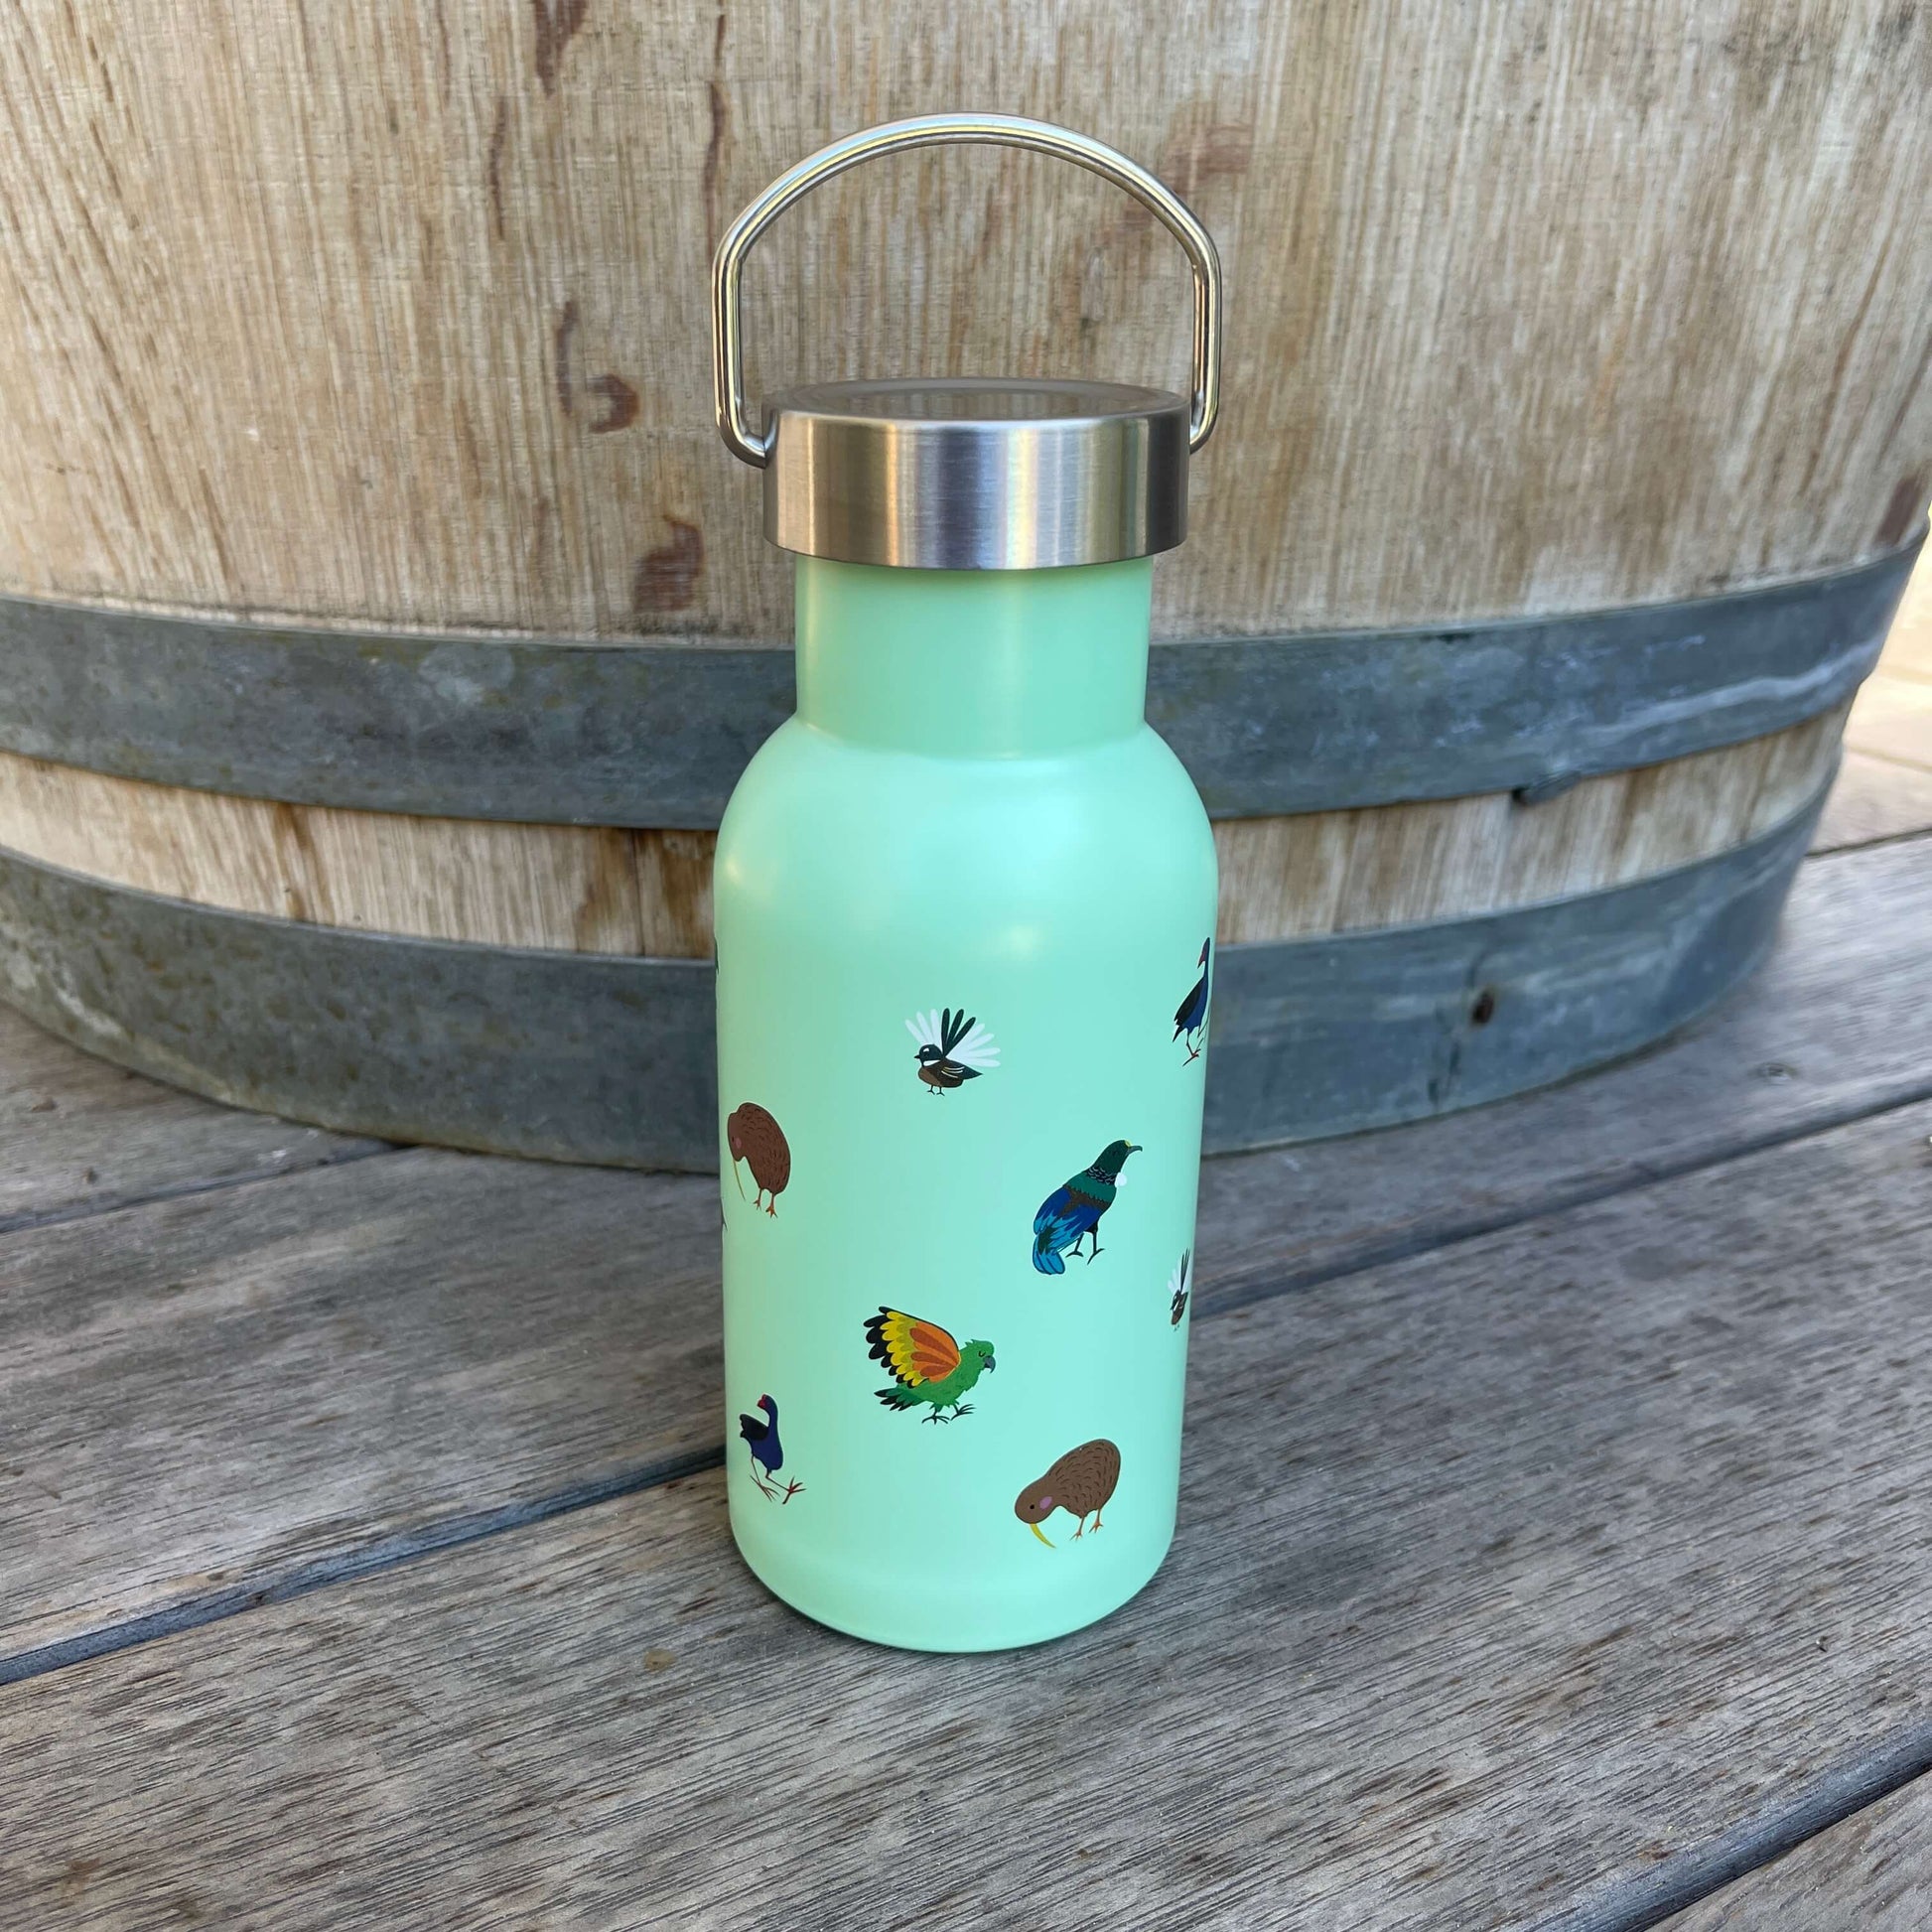 Small kids drink bottle with a stainless screw top in mint green with New Zealand birds on it.